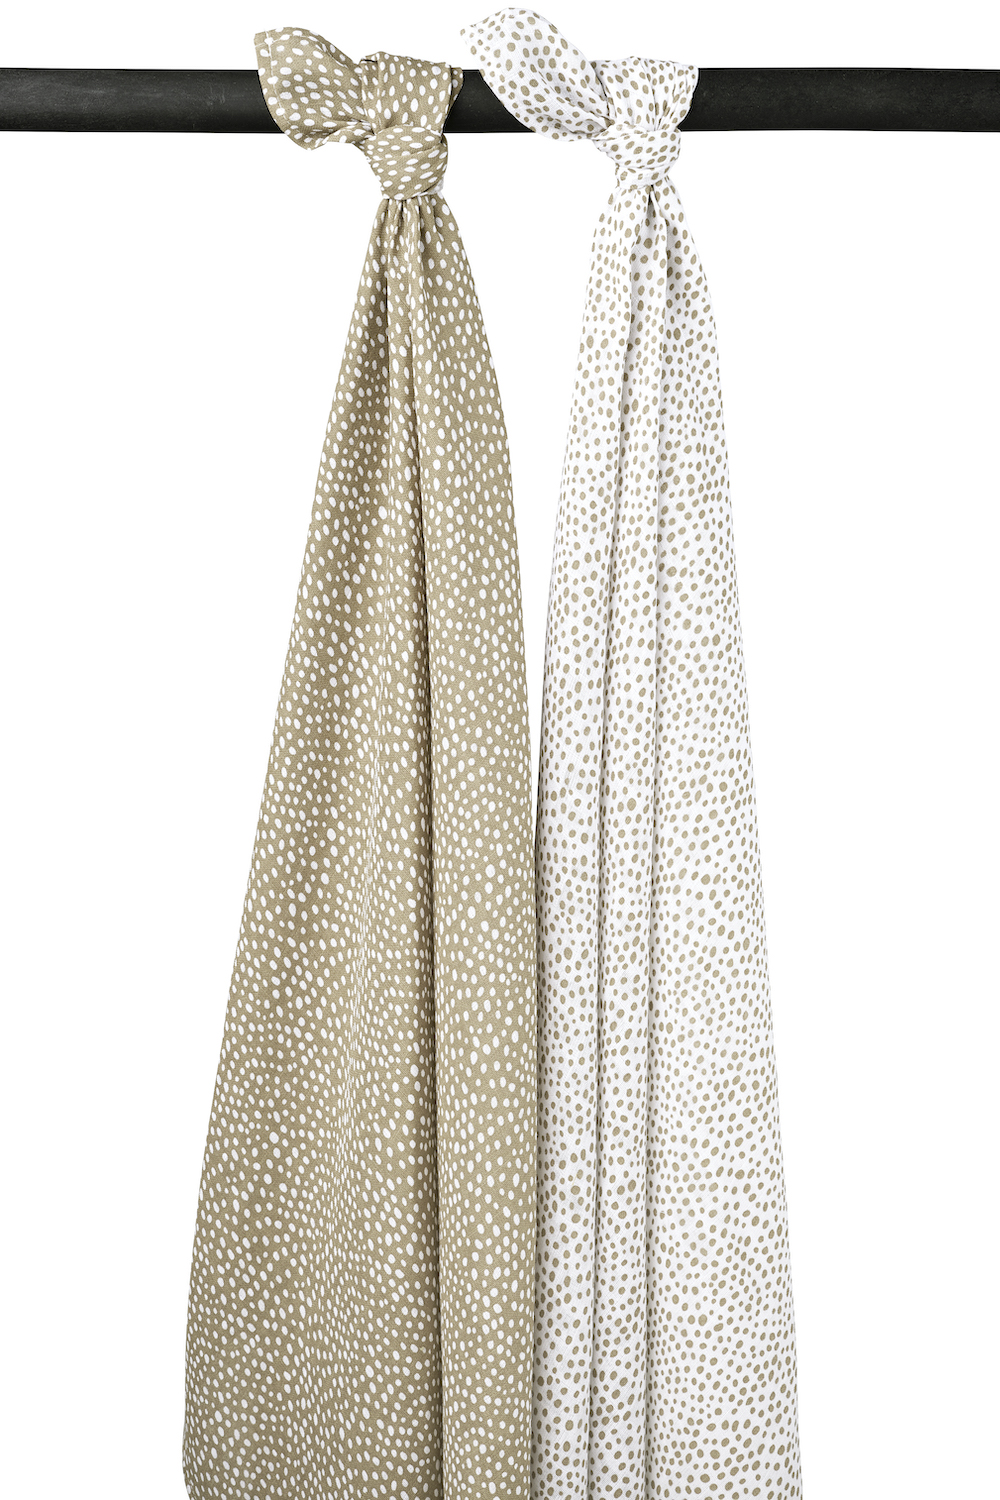 Swaddle 2-pack muslin Cheetah - taupe - 120x120cm